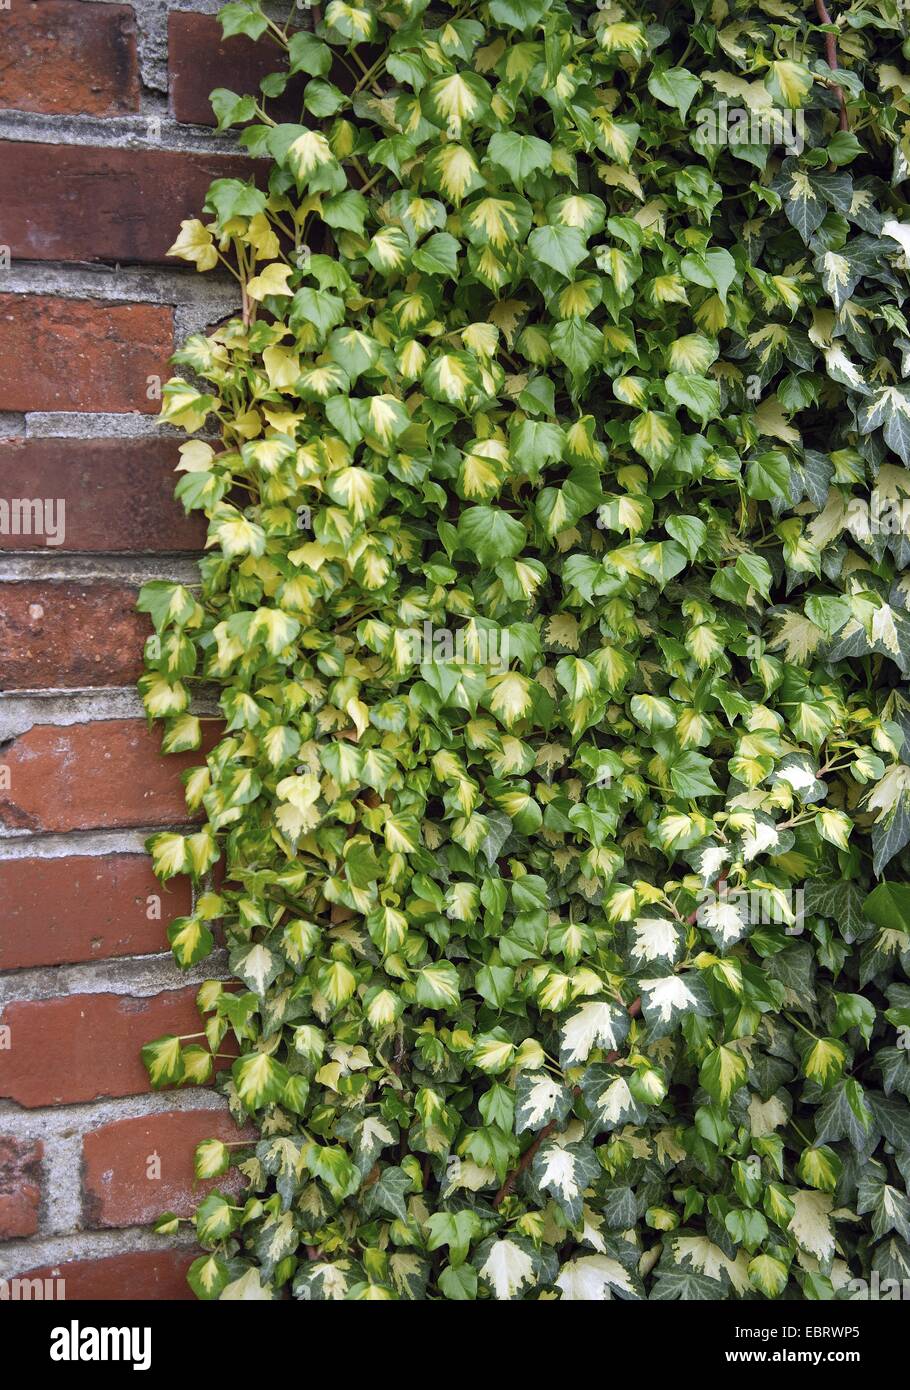 English ivy, common ivy (Hedera helix 'Goldheart', Hedera helix Goldheart), cultivar Goldheart climbing up a cladding Stock Photo